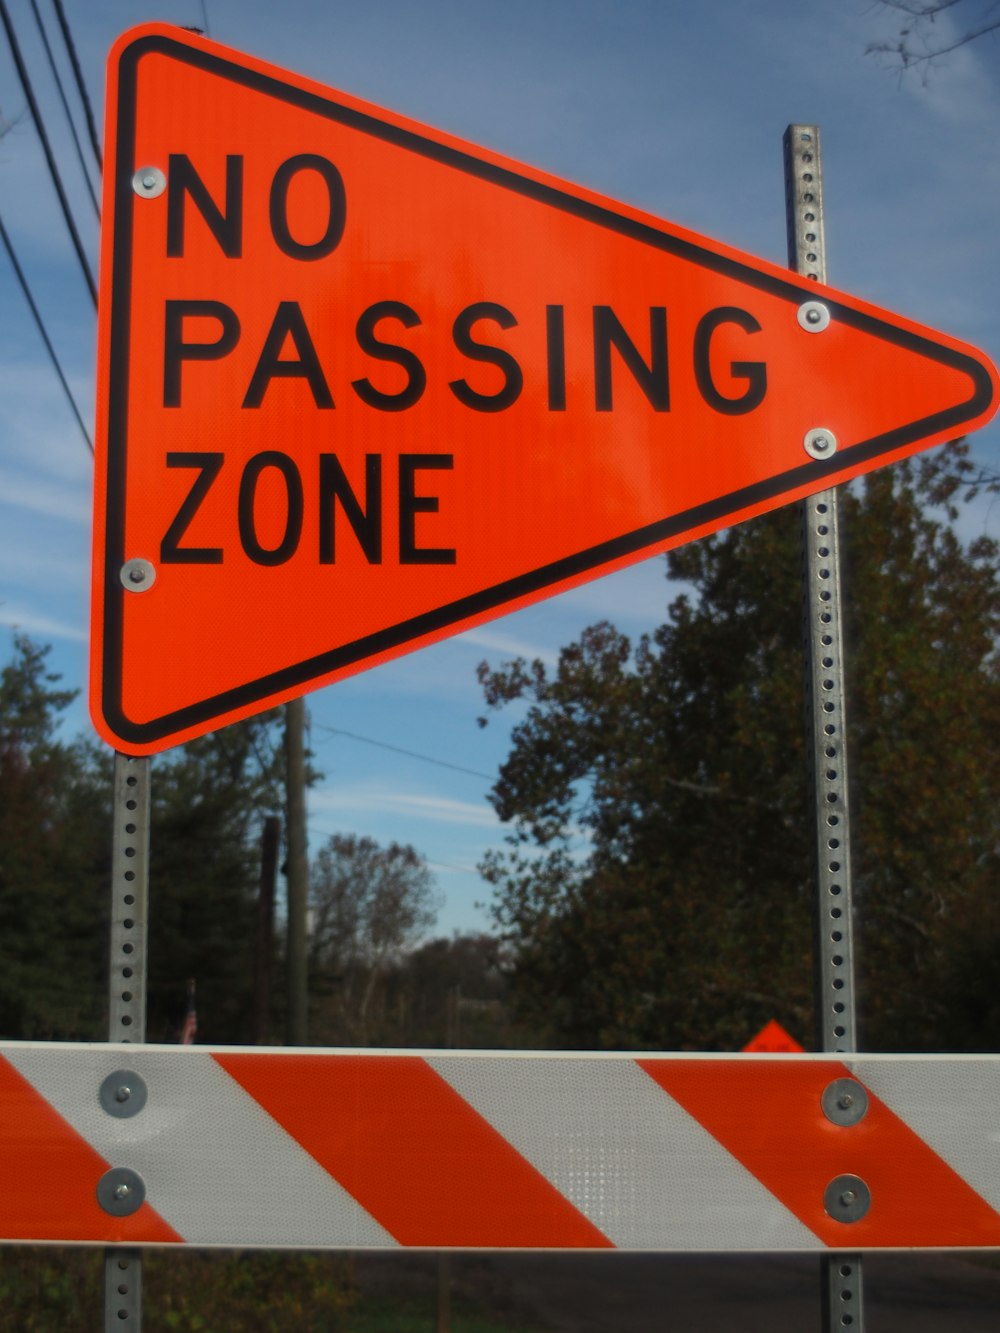 a street sign that says no passing zone